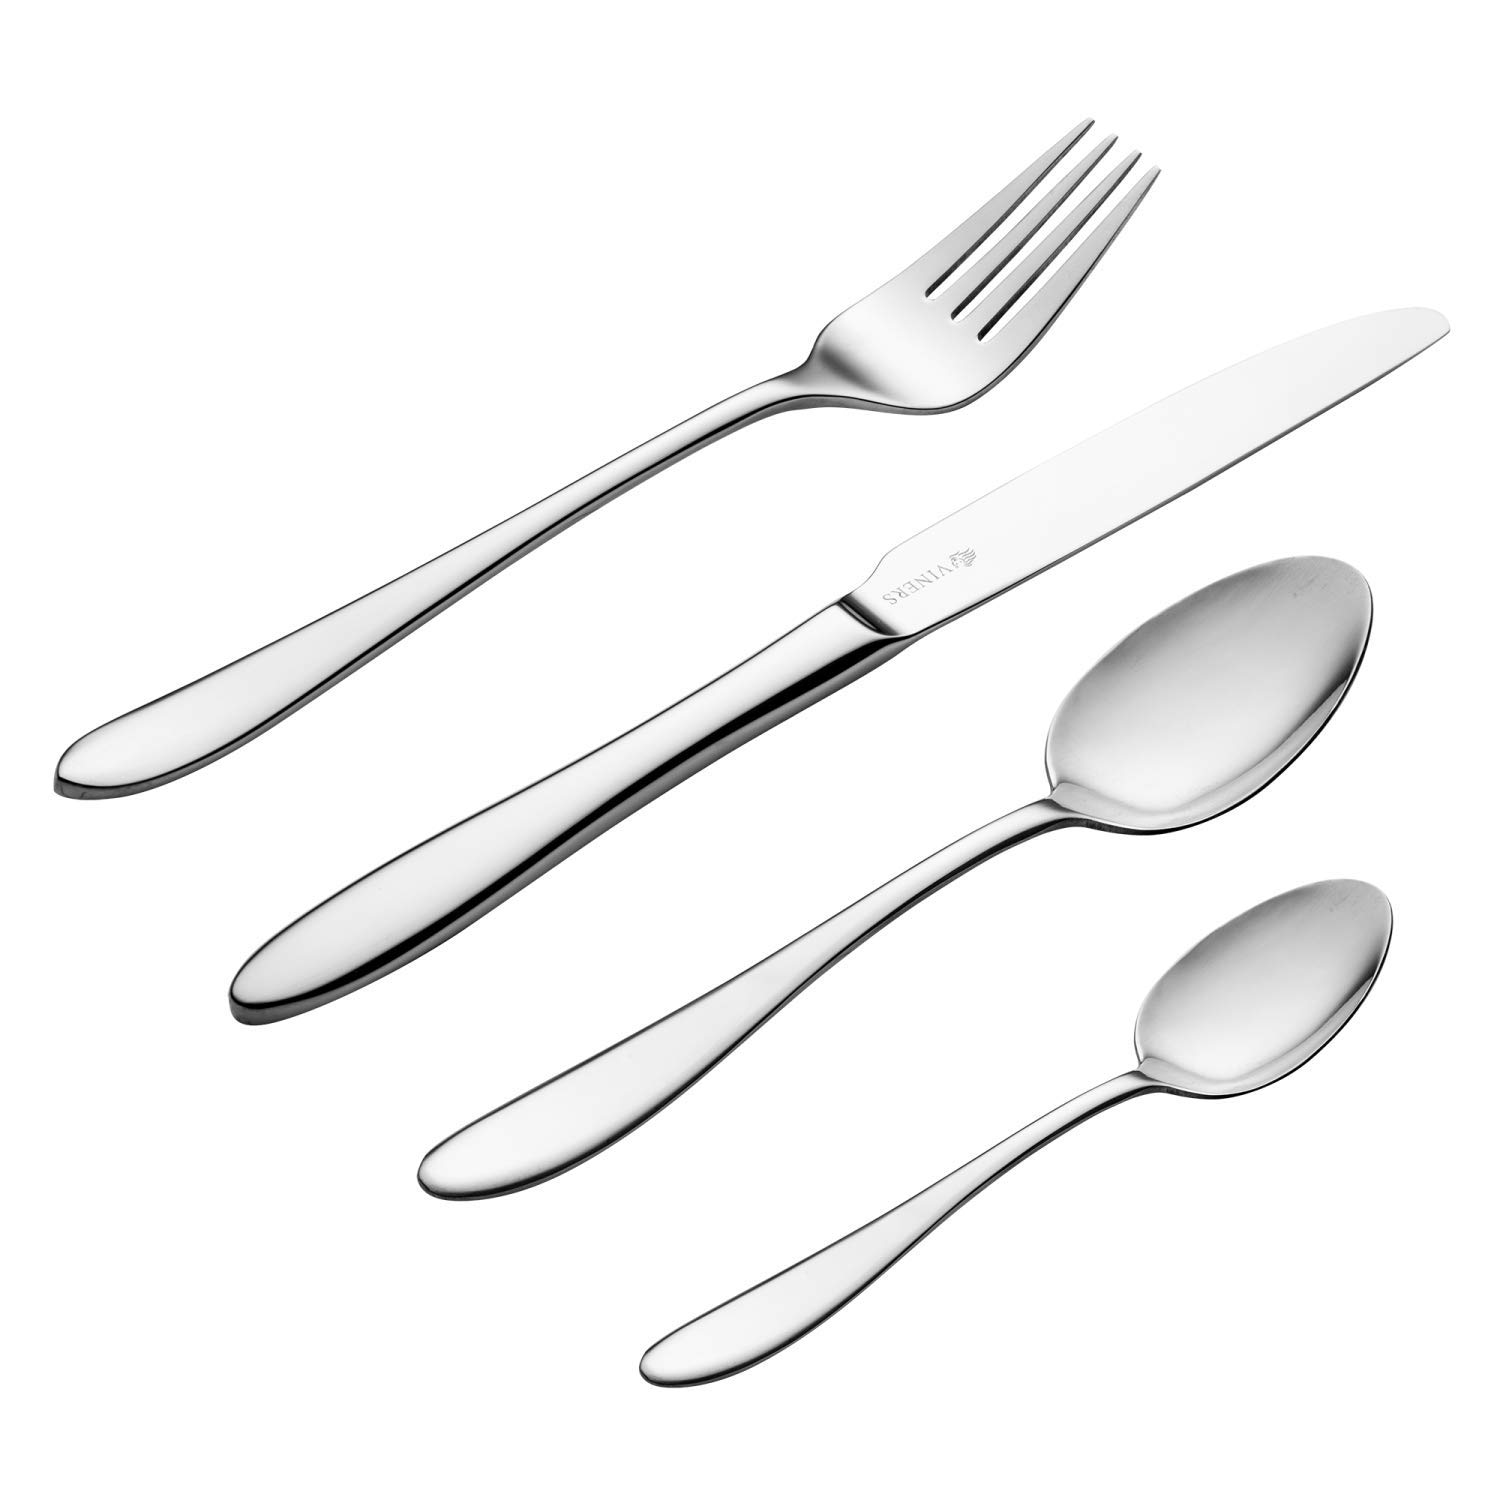 Viners Tabac 26 Piece Cutlery Set